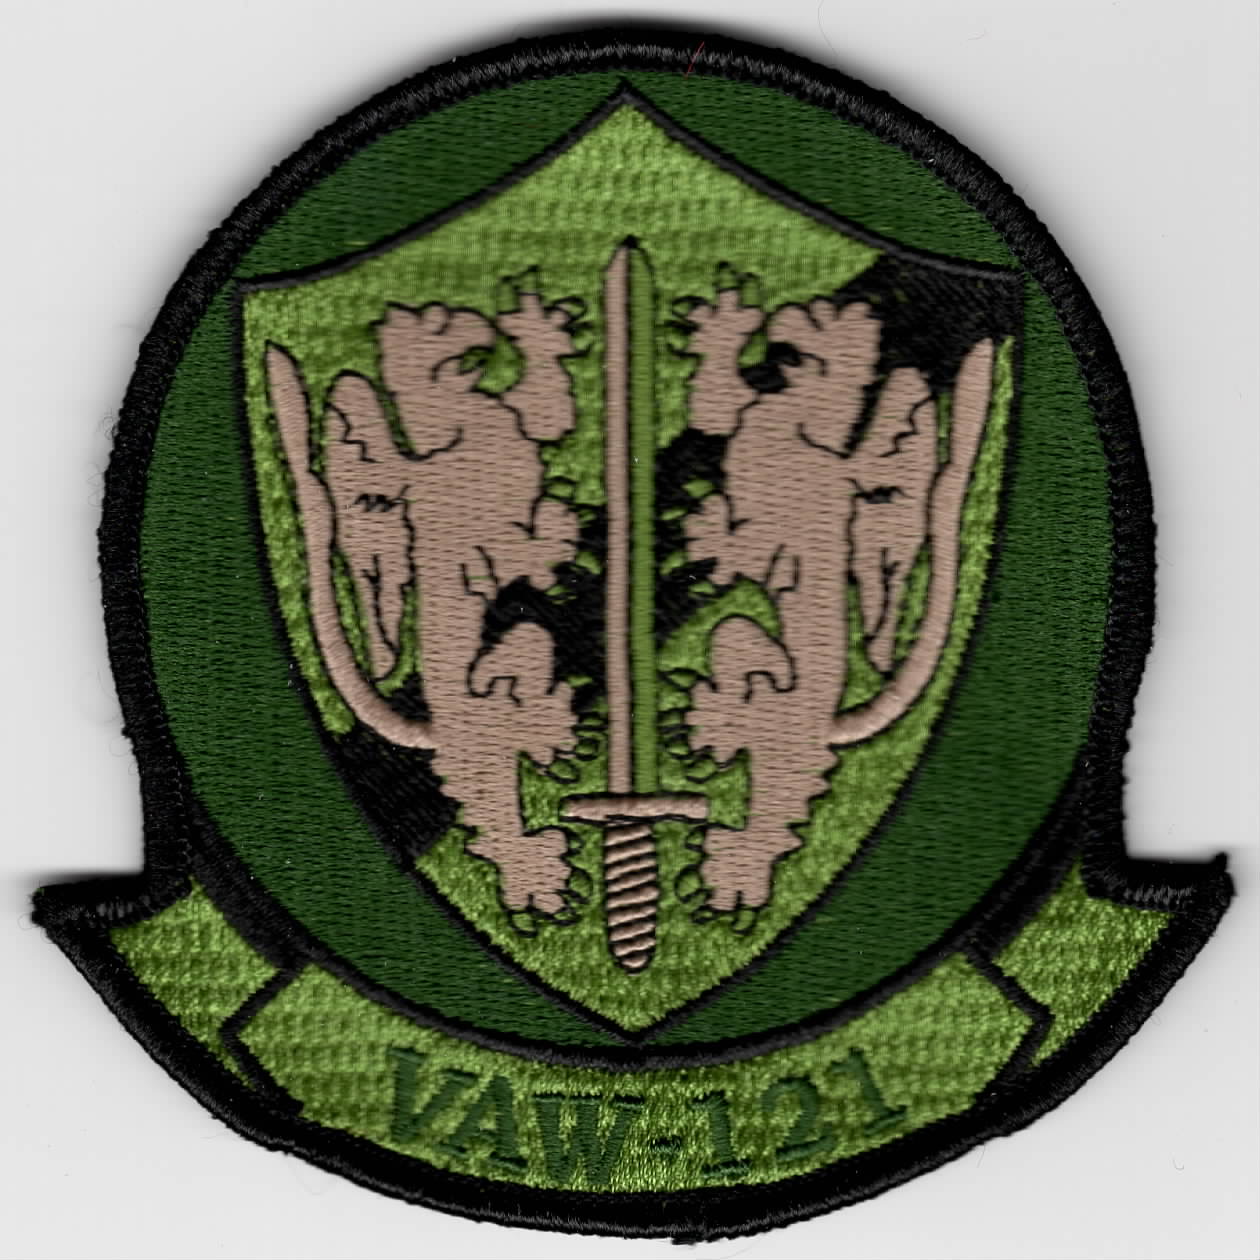 VAW-121 Squadron Patch (Green)